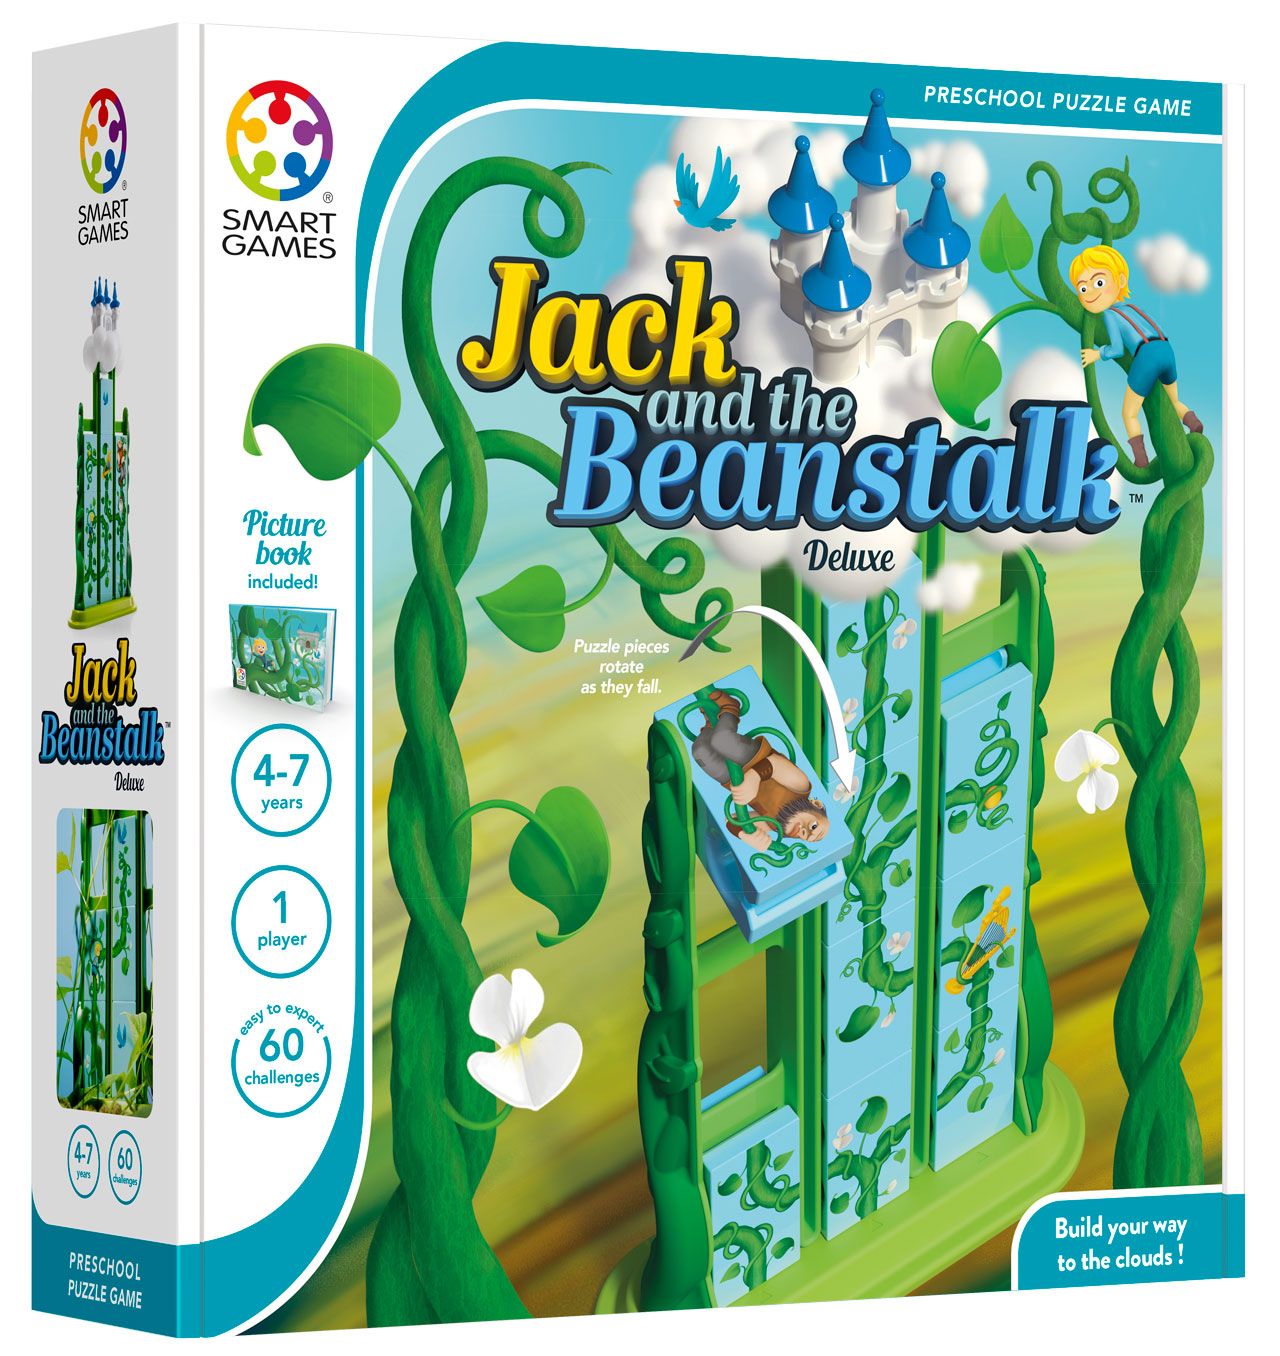 NEW - Jack and the Beanstalk puzzle game - How to play